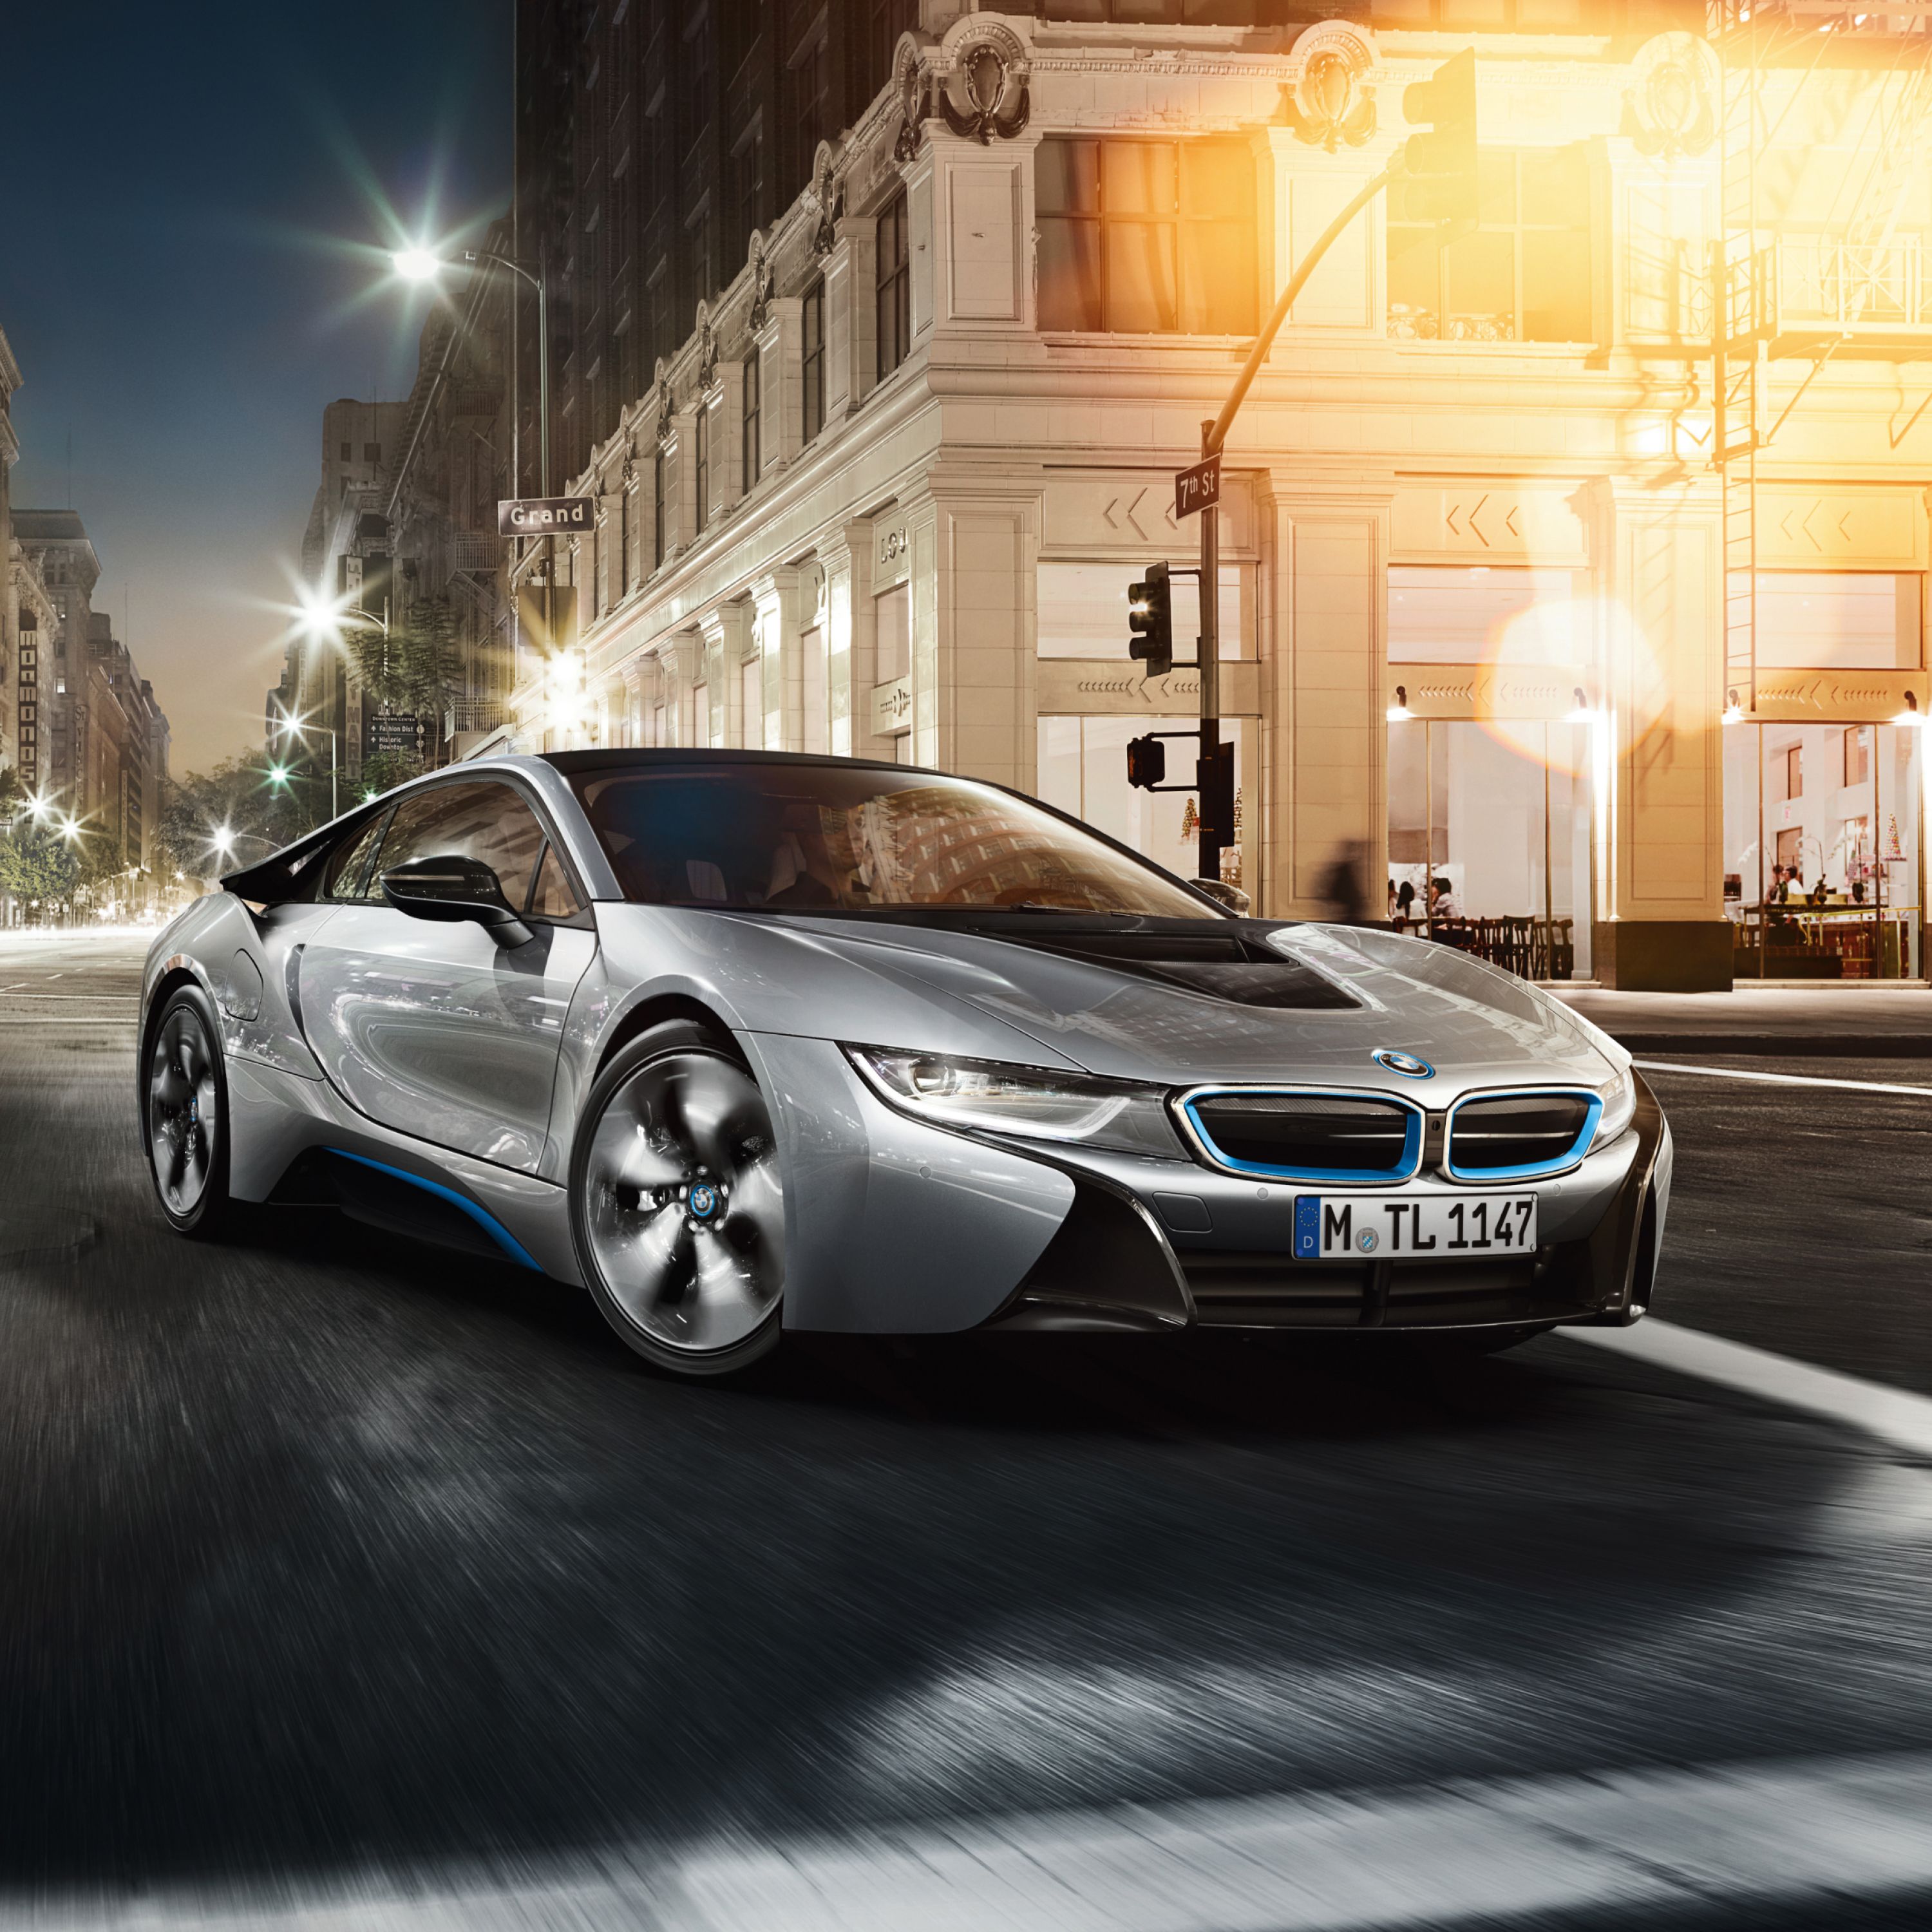 Silver BMW i8 plug in hybrid sports car parked in front of a grand hotel in a capitol city